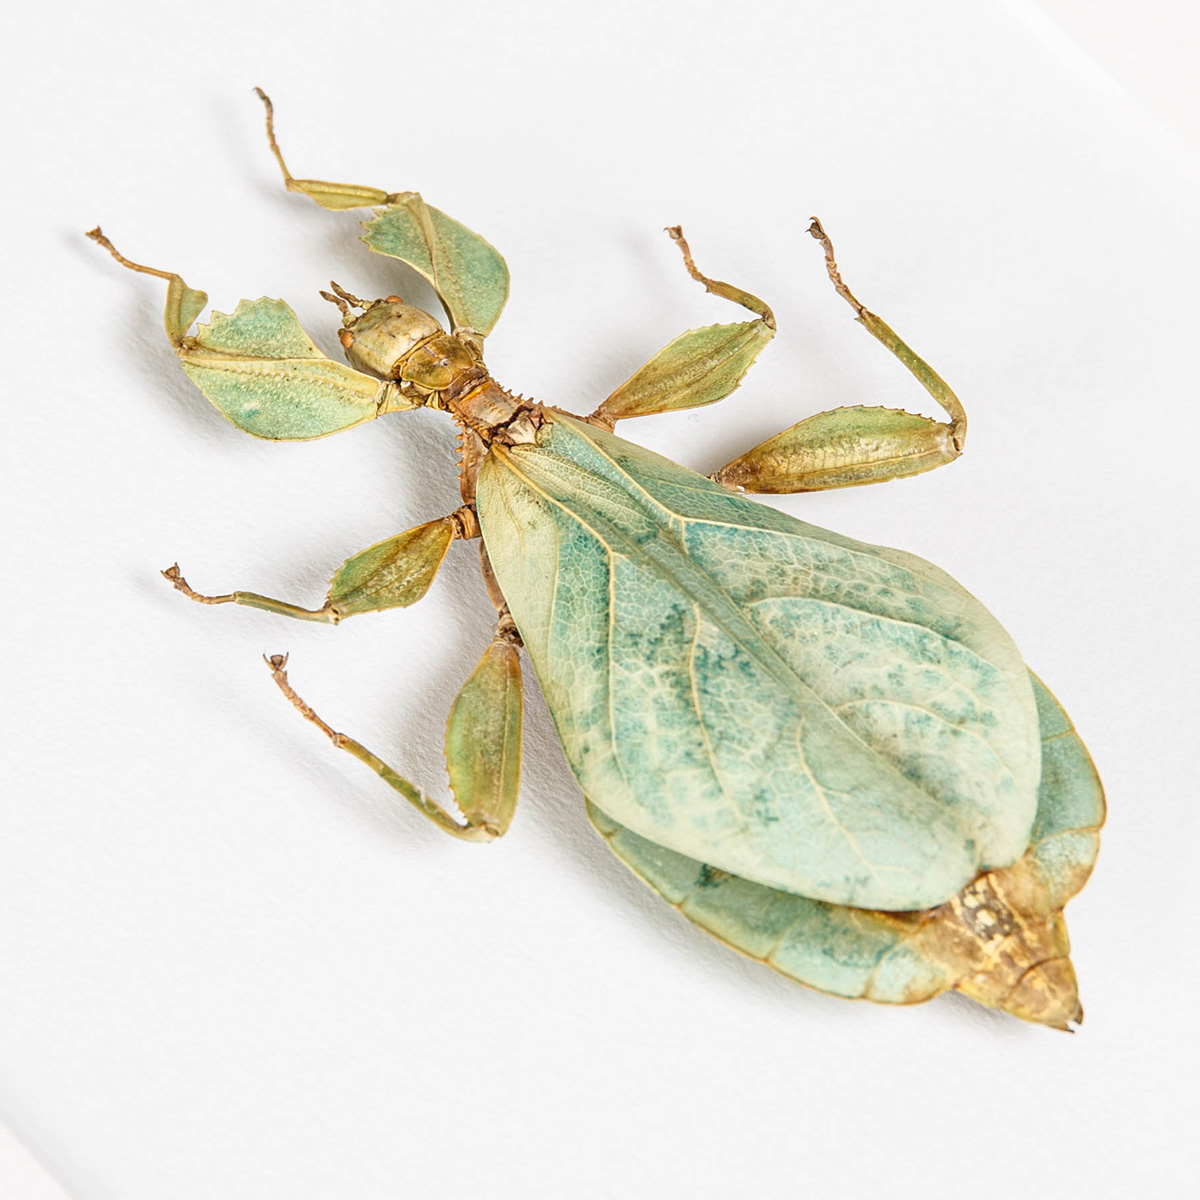 Walking Leaf Insect in Box Frame (Phyllium letiranti)